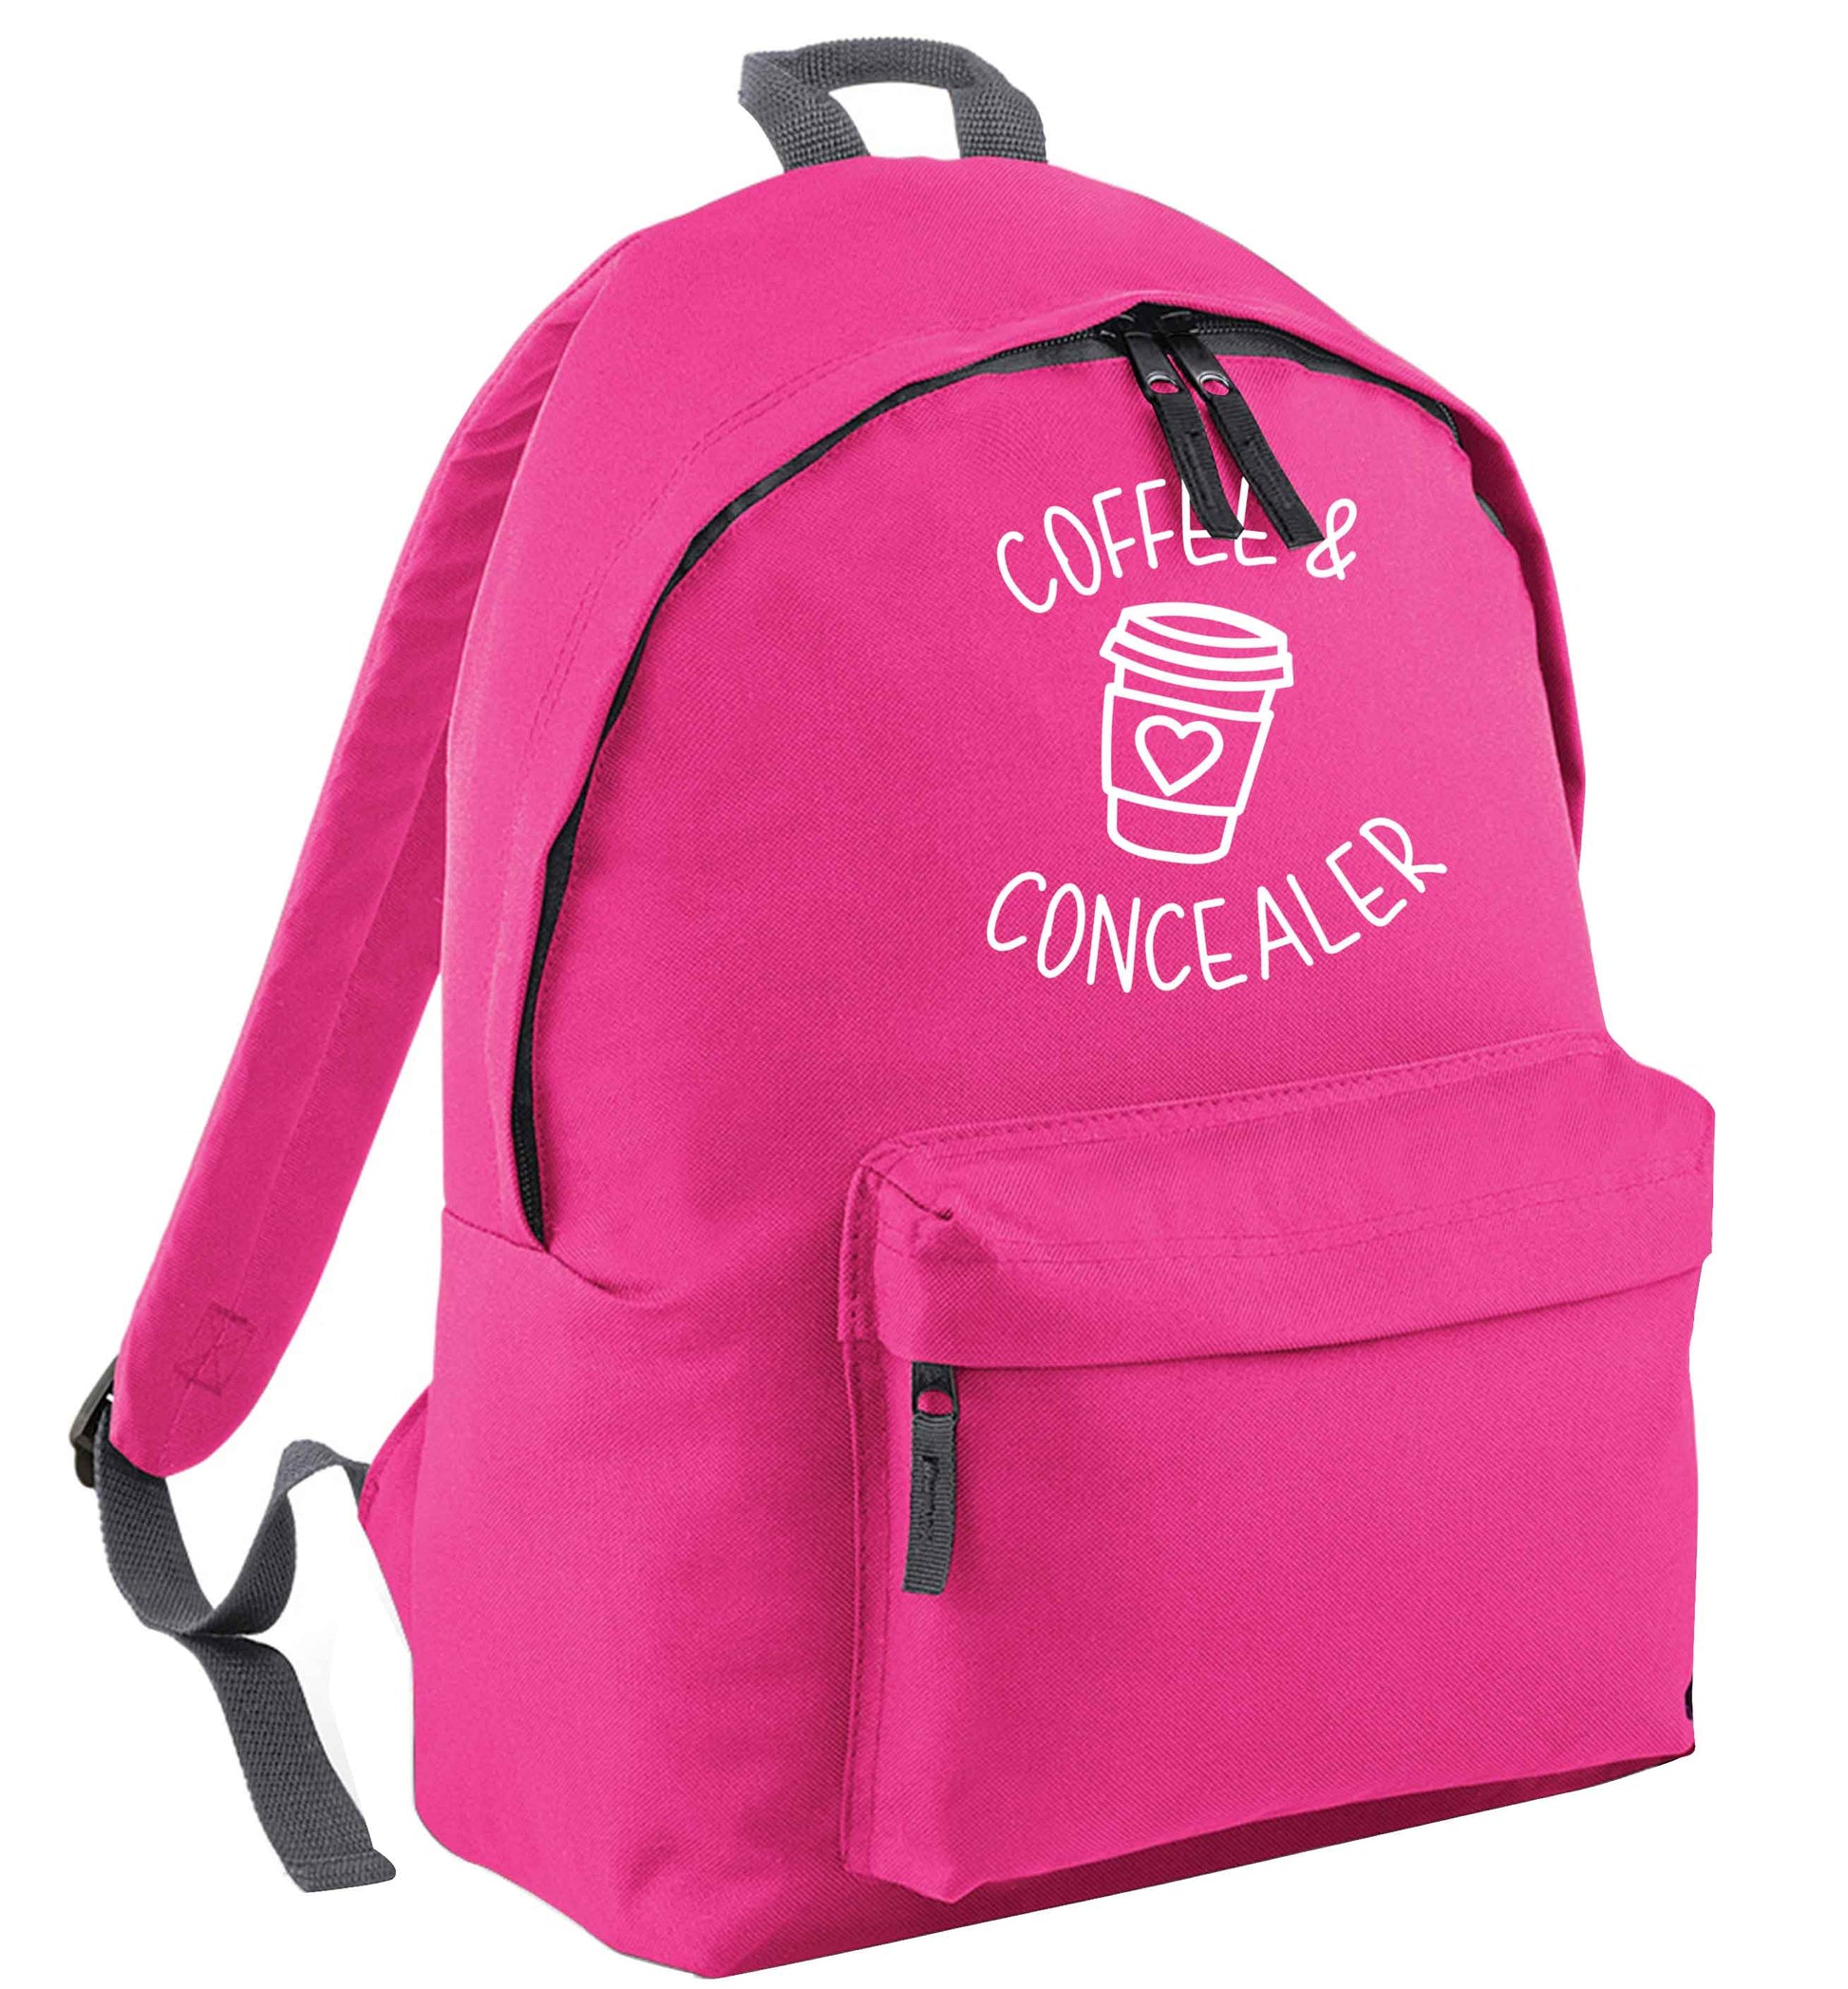 Coffee and concealer | Children's backpack